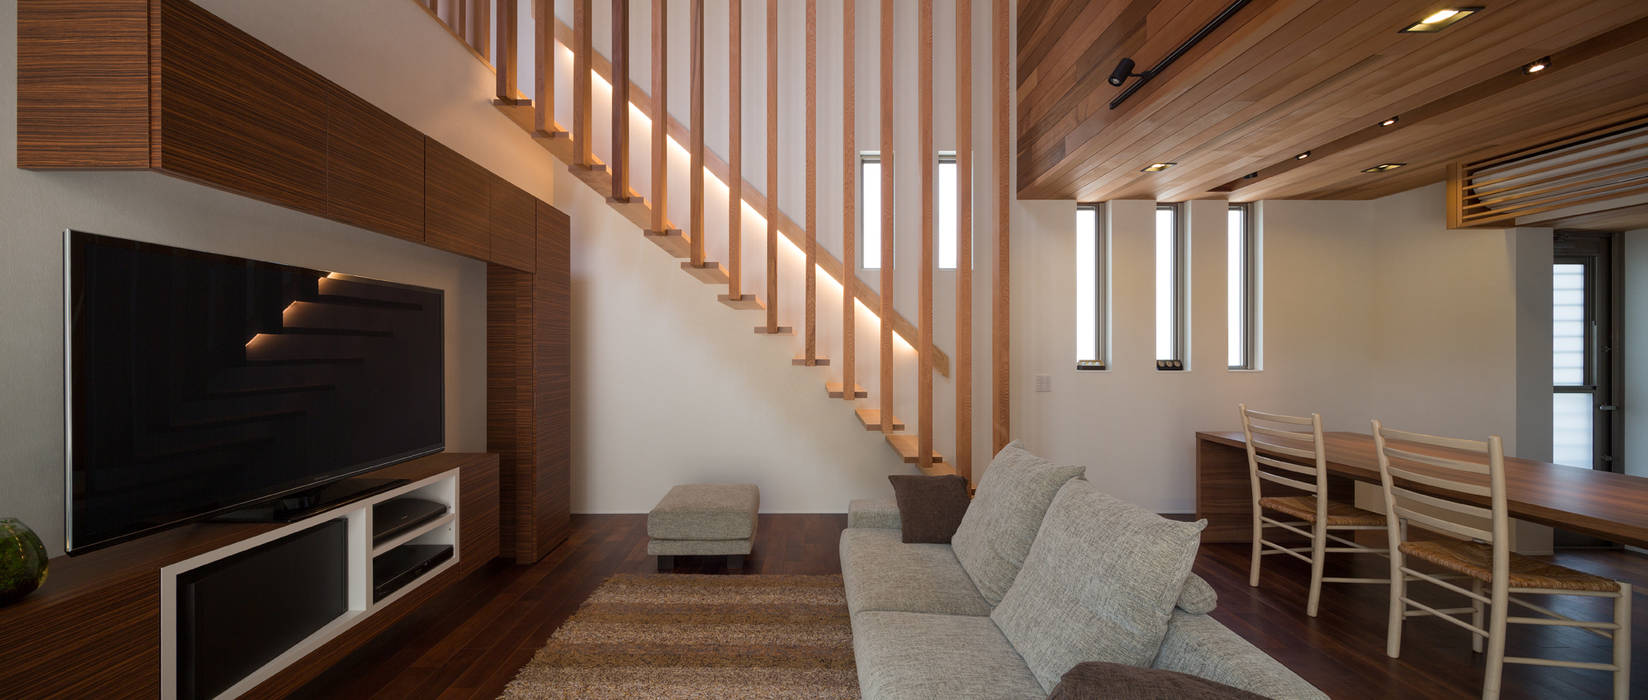 M4-house 「重なり合う家」, Architect Show Co.,Ltd Architect Show Co.,Ltd Moderne Häuser